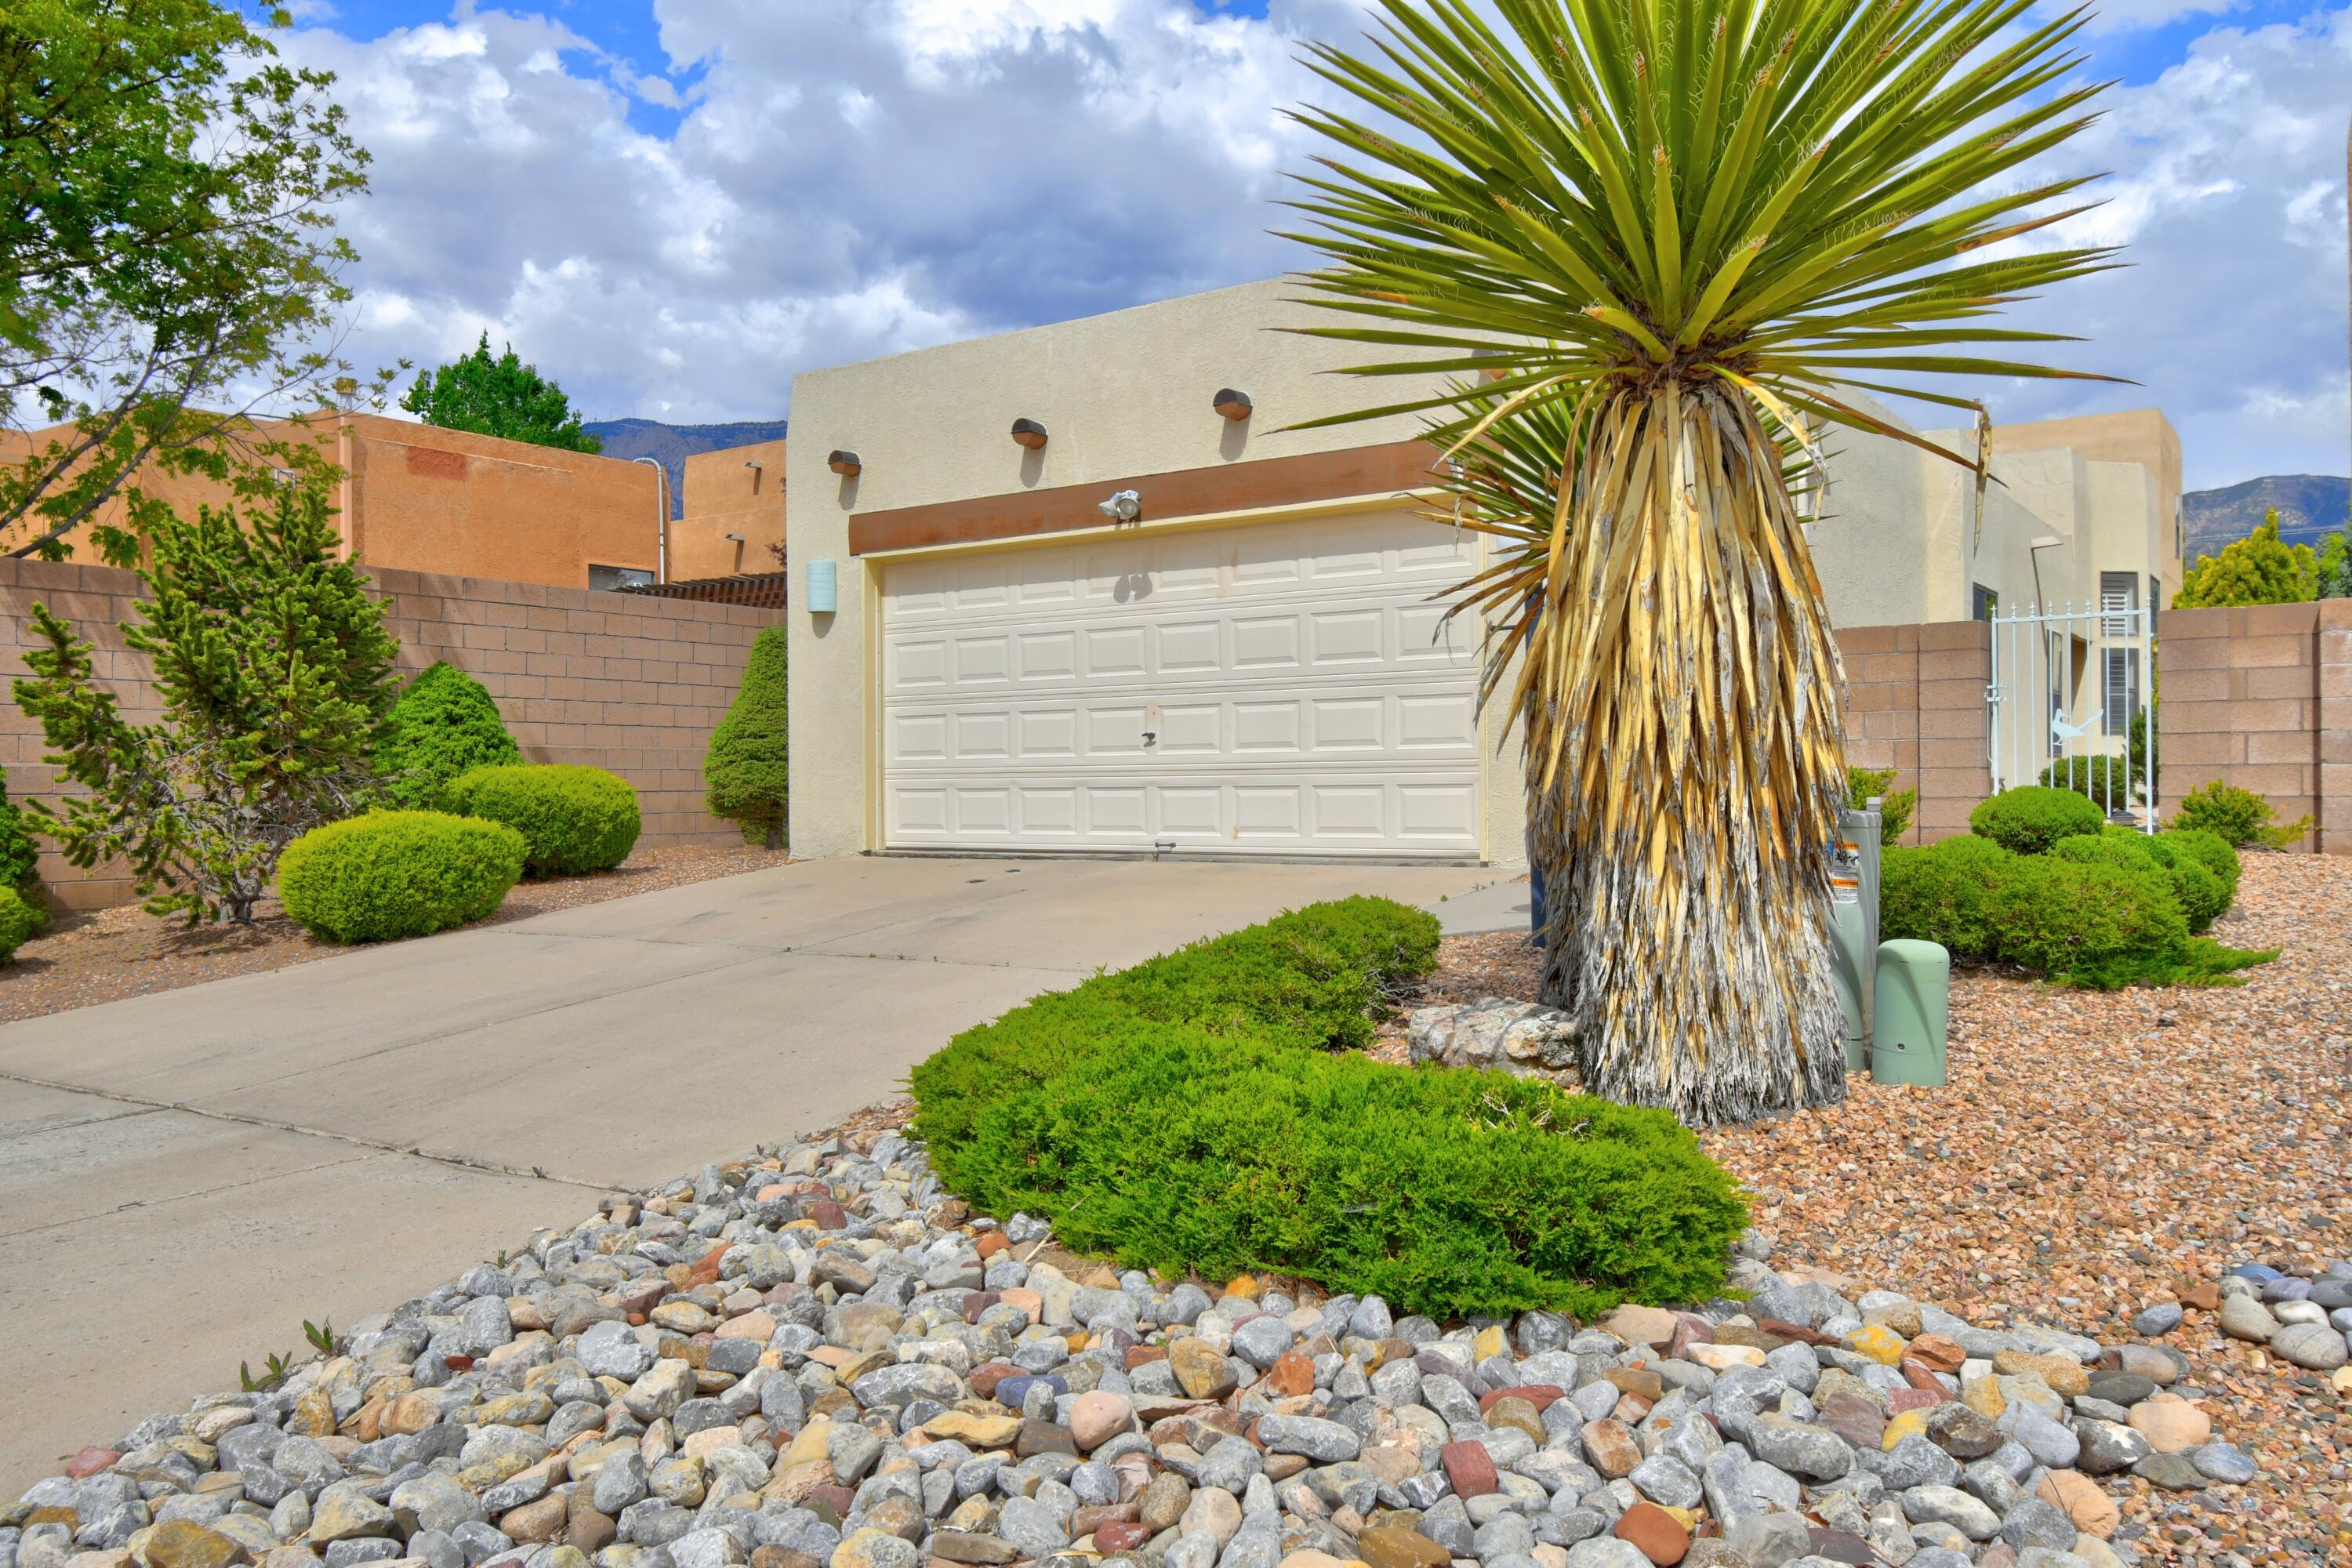 Don't Miss This Opportunity For A One Owner, Single Story Patio Home in Sandia Heights.Enter Into The Foyer That Is Open To High Ceilings & Lots Of Light For The Dining/Flex Room W/Stacked Windows, Window Seat, Plantation Shutters Flowing Into The Flex/Living Room.The Cook's Kitchen Features Double Ovens, Ample Cabinets W/Eat In Area & Separate Bar Top Overlooking The Family/TV Room W/Gas Log Fireplace & Built In Shelves & Cabinets. Venture Out To The Covered Back Patio & Custom Designed Landscaped Backyard Water Feature & Open Area.You Can Also Enter From the Side Yard Gate.Continue To The Bedroom Area Featuring An Oversized Primary En Suite. Oversized Garage Features a 5' Length Extension & a Side Extension.  Easy Access to Coffee Shop, Grocery, Dry Cleaners Plus Close By Walking Trails